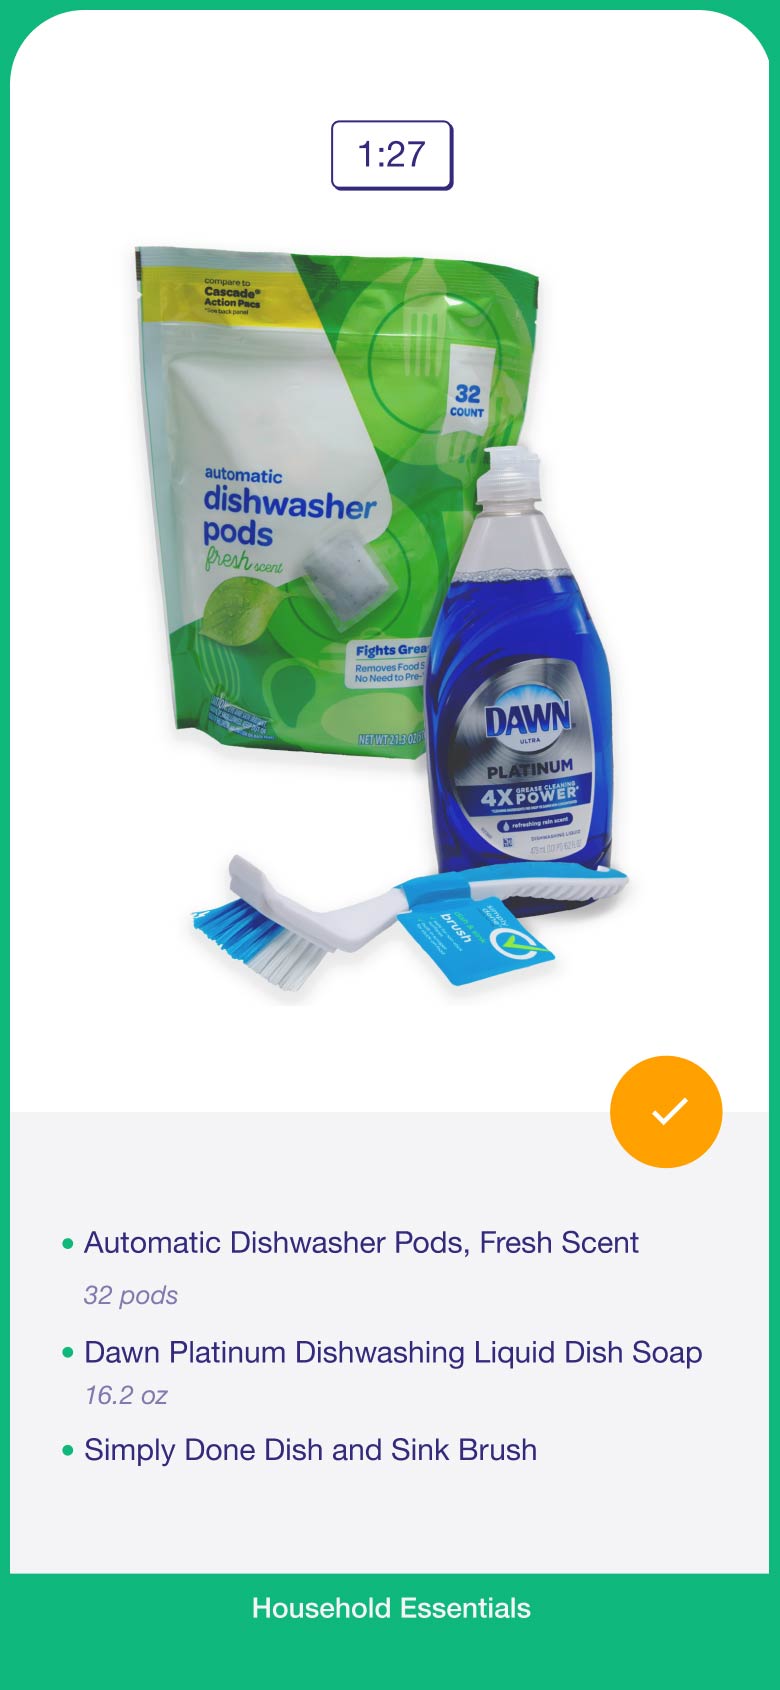 Laundry and cleaning bundle number 2: dishwasher pods, Dawn dish soap, and dish brush